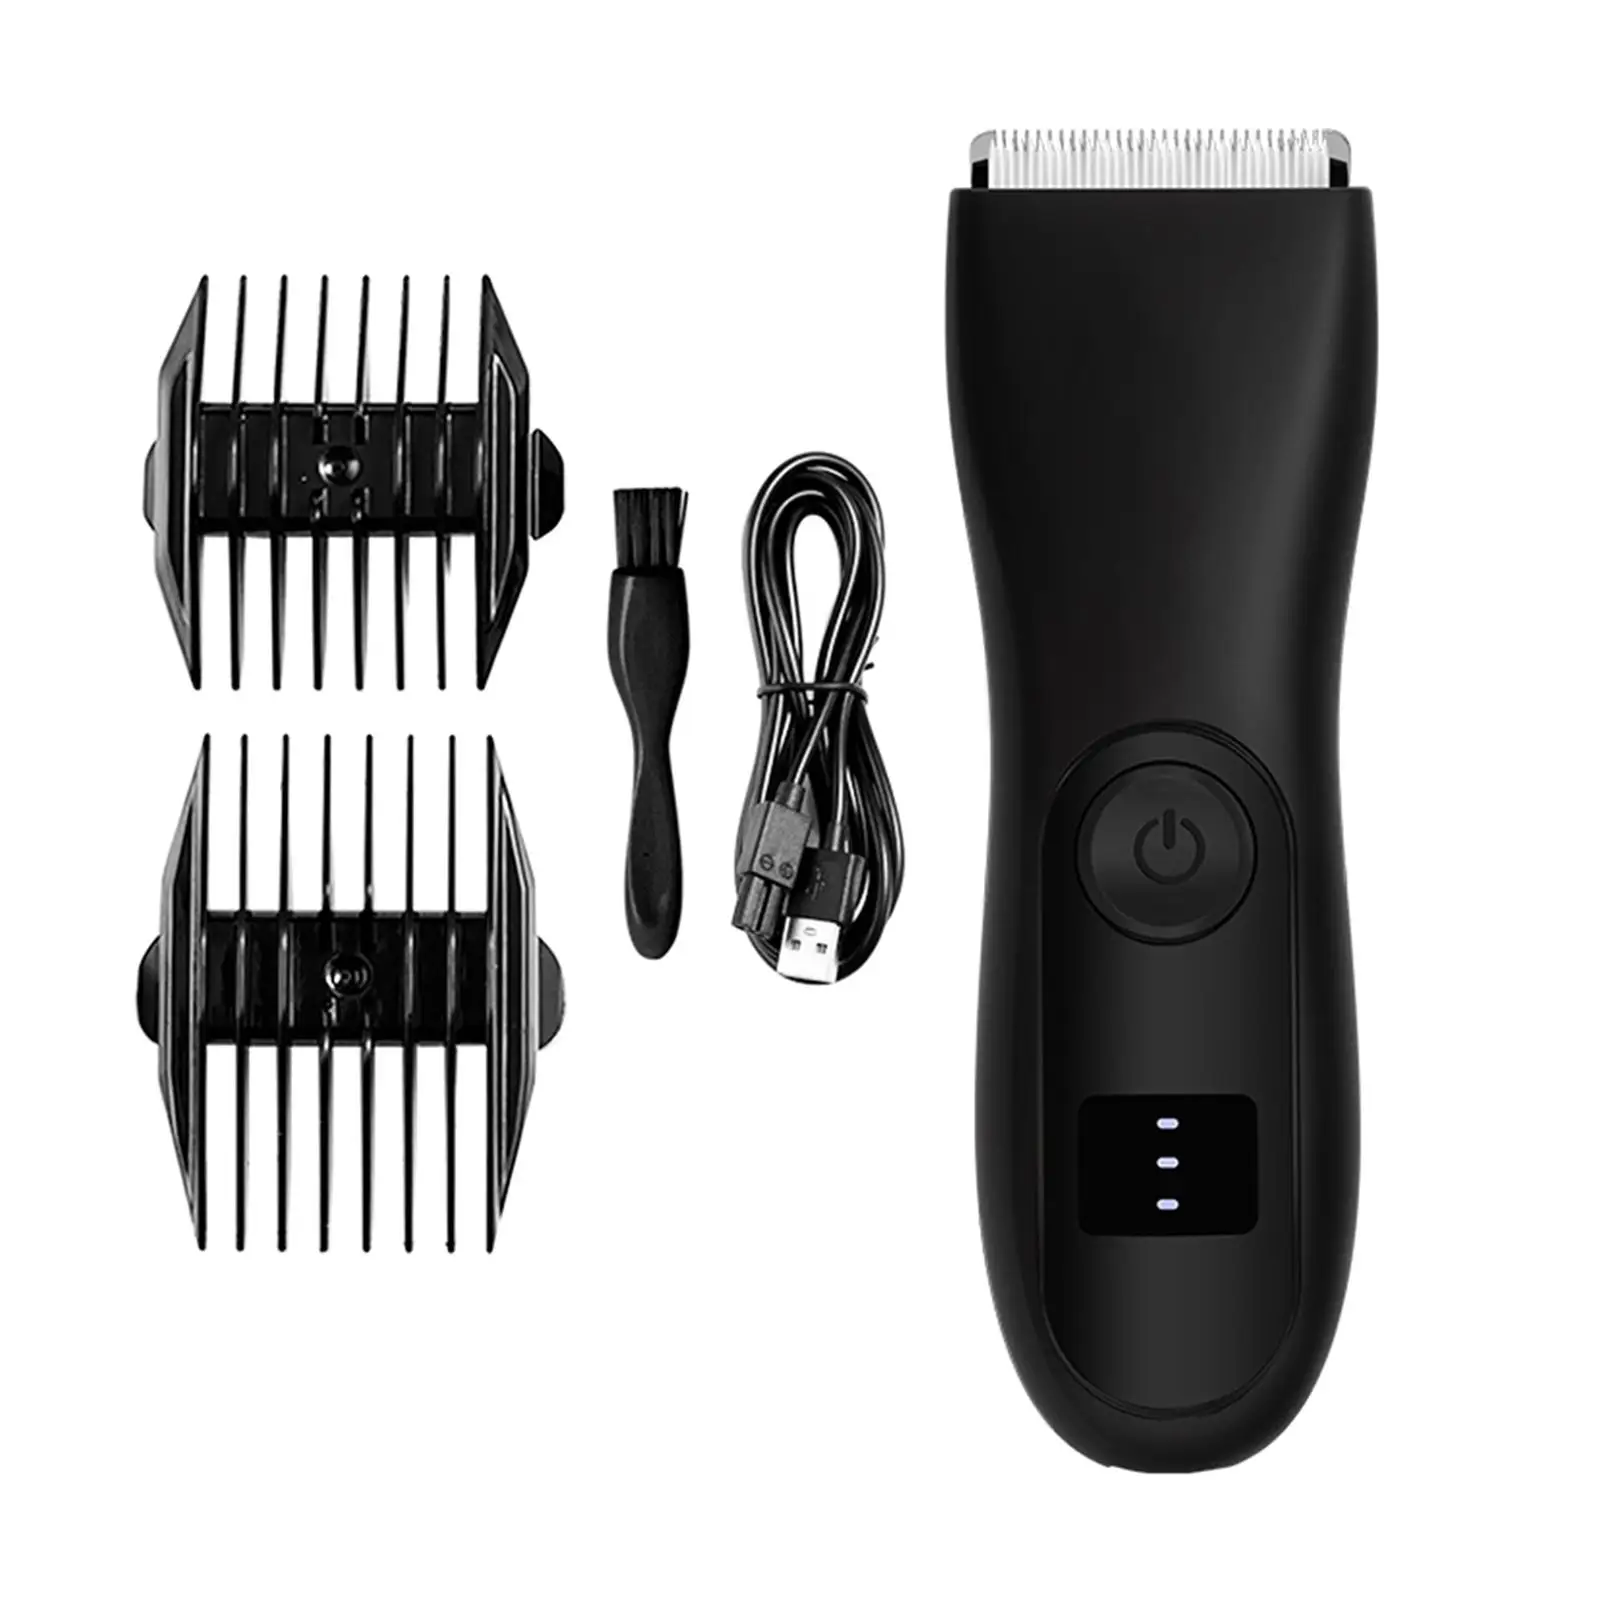 Electric hair trimmer Trimmer Body Shaver Hair Remover Ceramic Blades Portable for Face